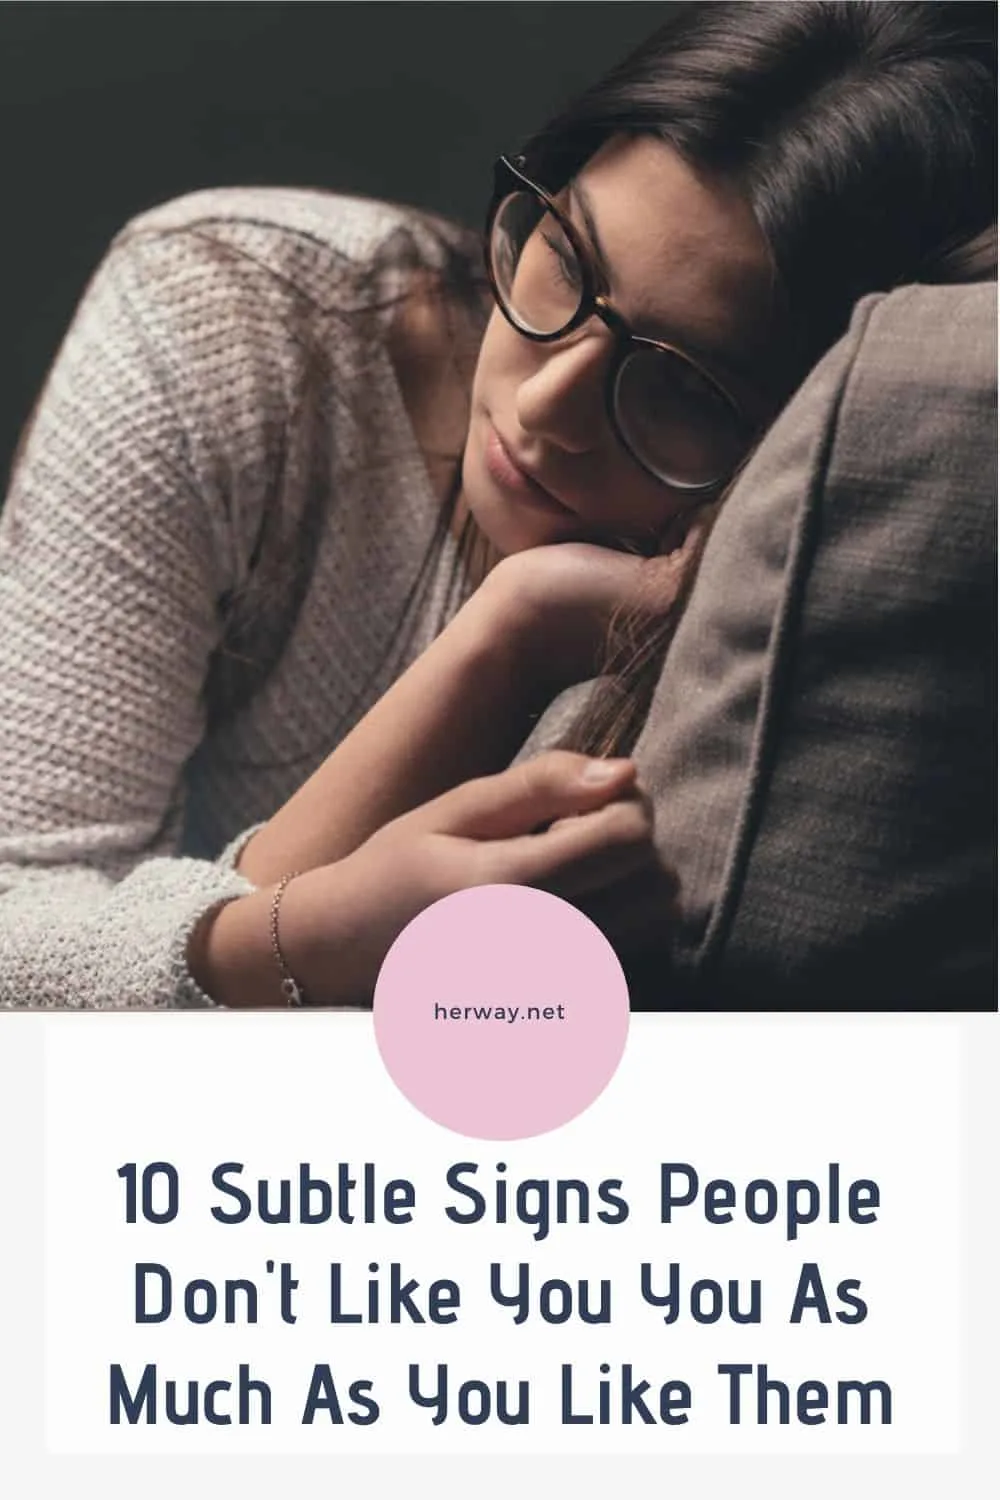 10 Subtle Signs People Don't Like You You As Much As You Like Them